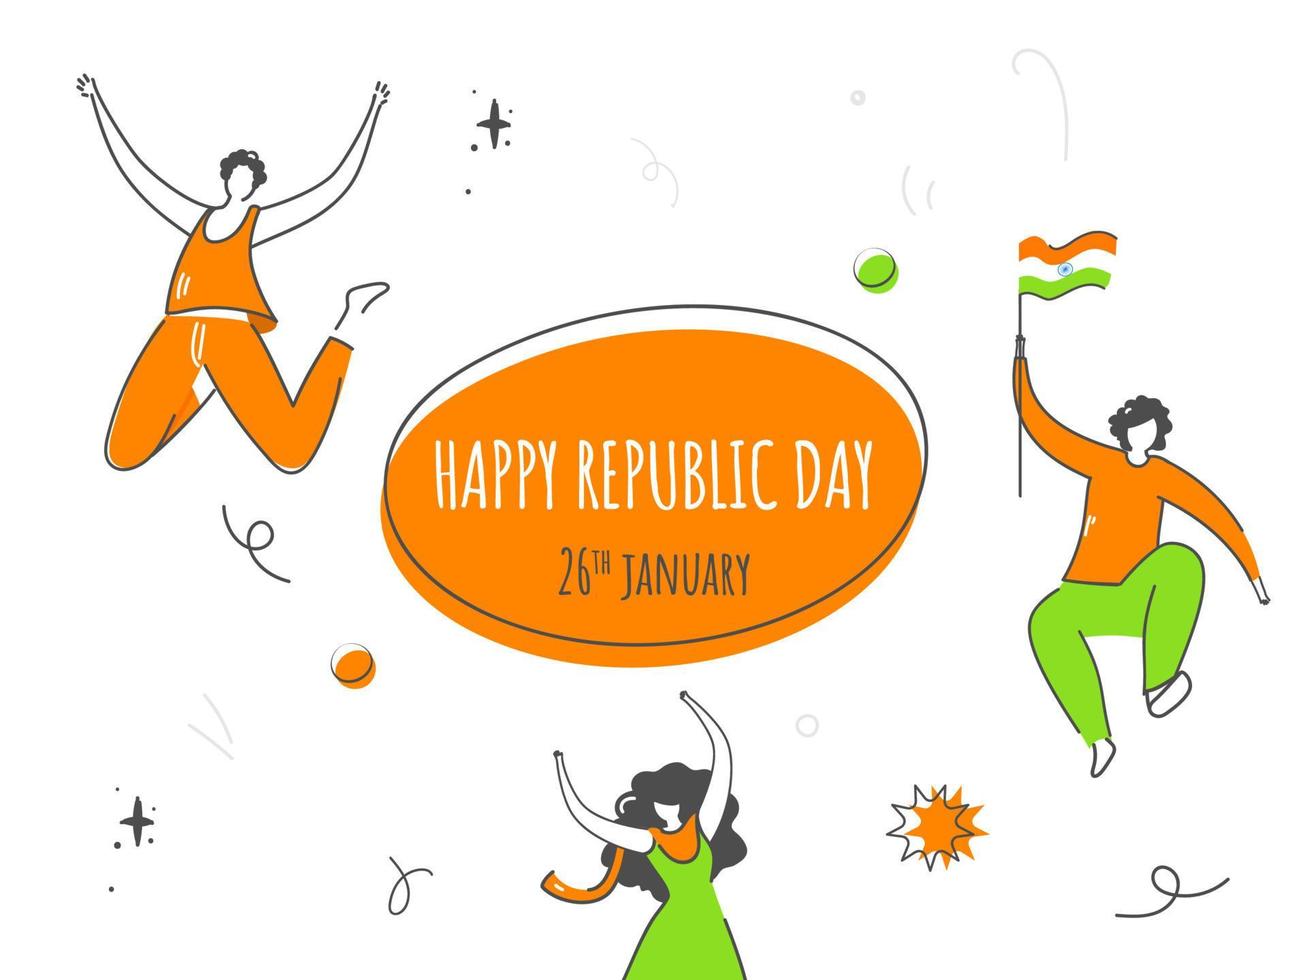 Illustration Of Cartoon Teenage People Jumping With Indian Flag On White Background For 26th January, Happy Republic Day. vector